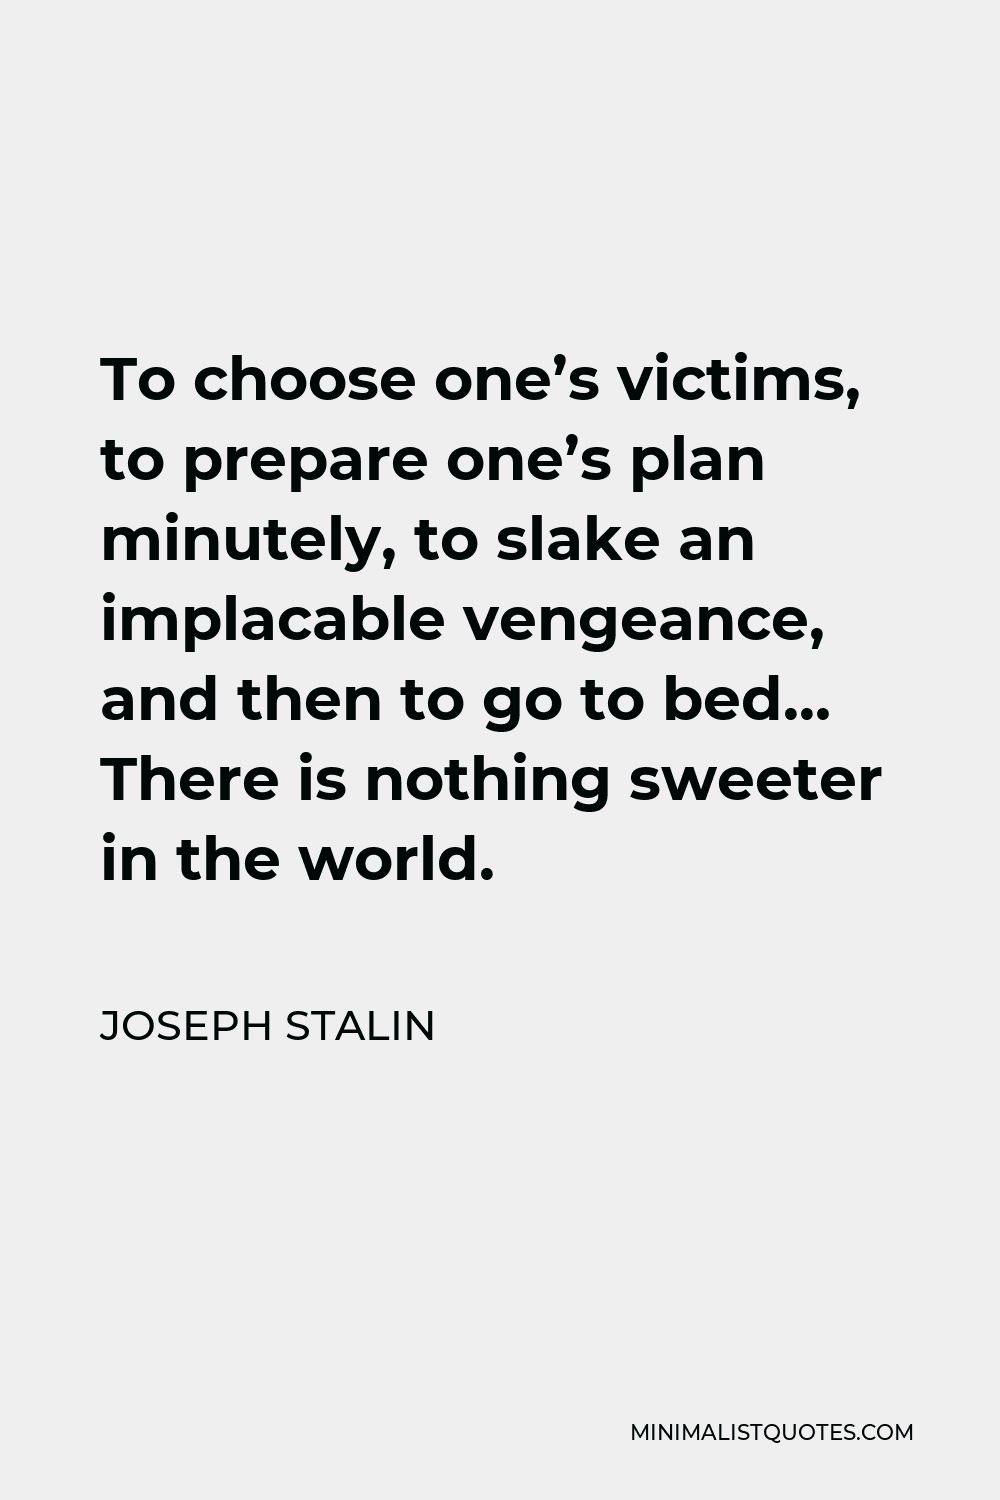 Joseph Stalin Quote - To choose one’s victims, to prepare one’s plan minutely, to slake an implacable vengeance, and then to go to bed… There is nothing sweeter in the world.